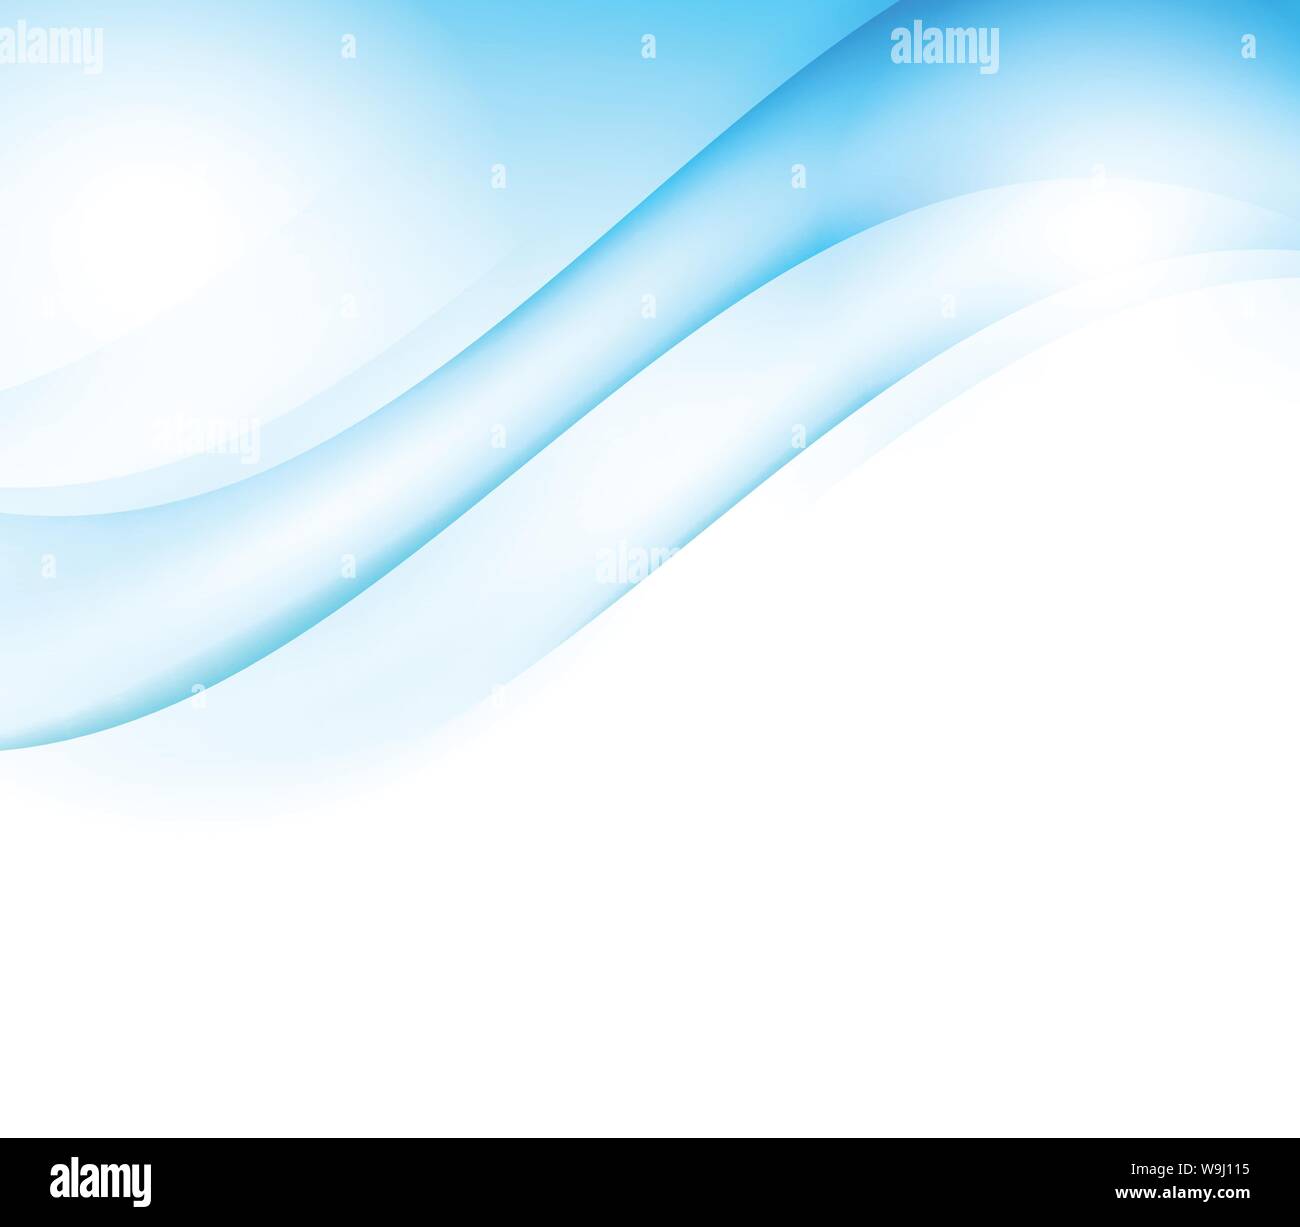 Blue waves .Abstract background Stock Vector